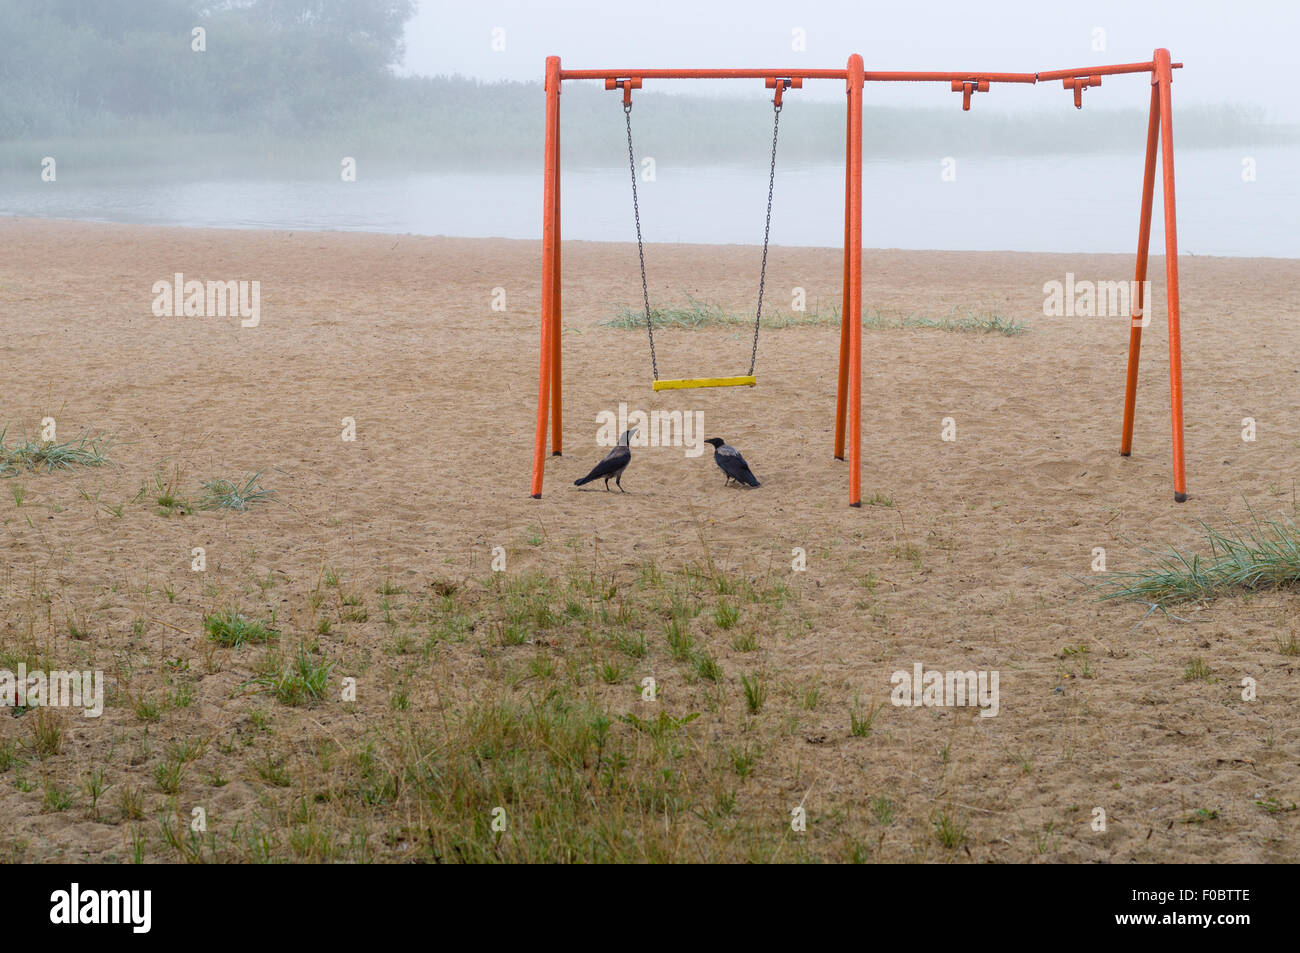 Old orange swing and two crows on the beach, foggy lake on background Stock Photo